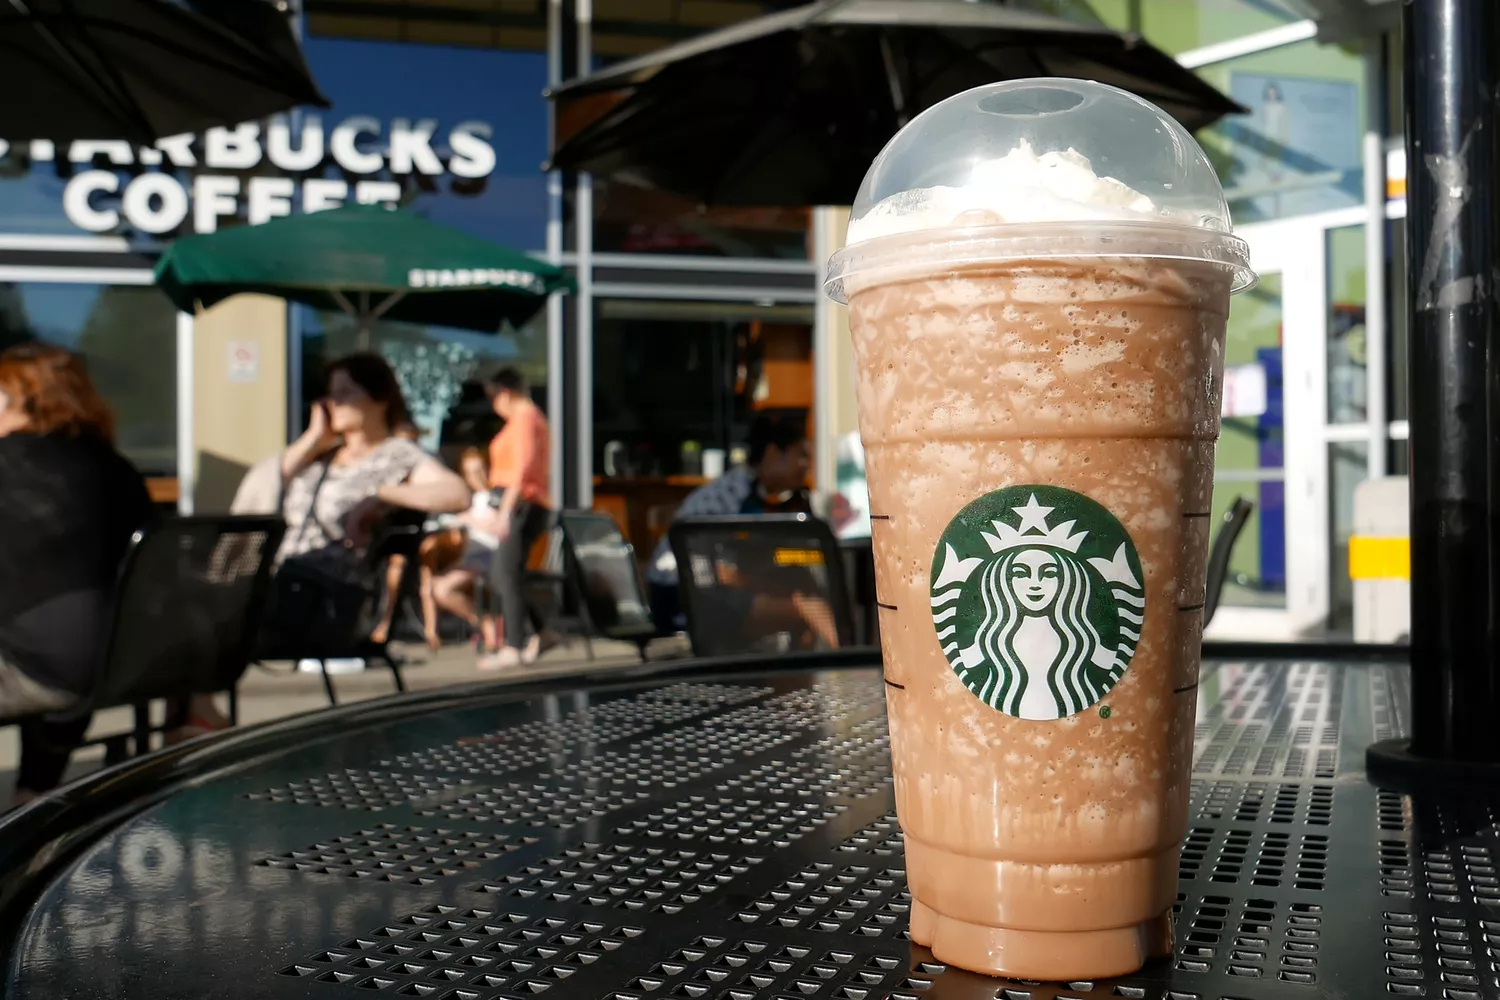 All Starbucks Drinks Are Half Off on Thursday — Here's the Deal